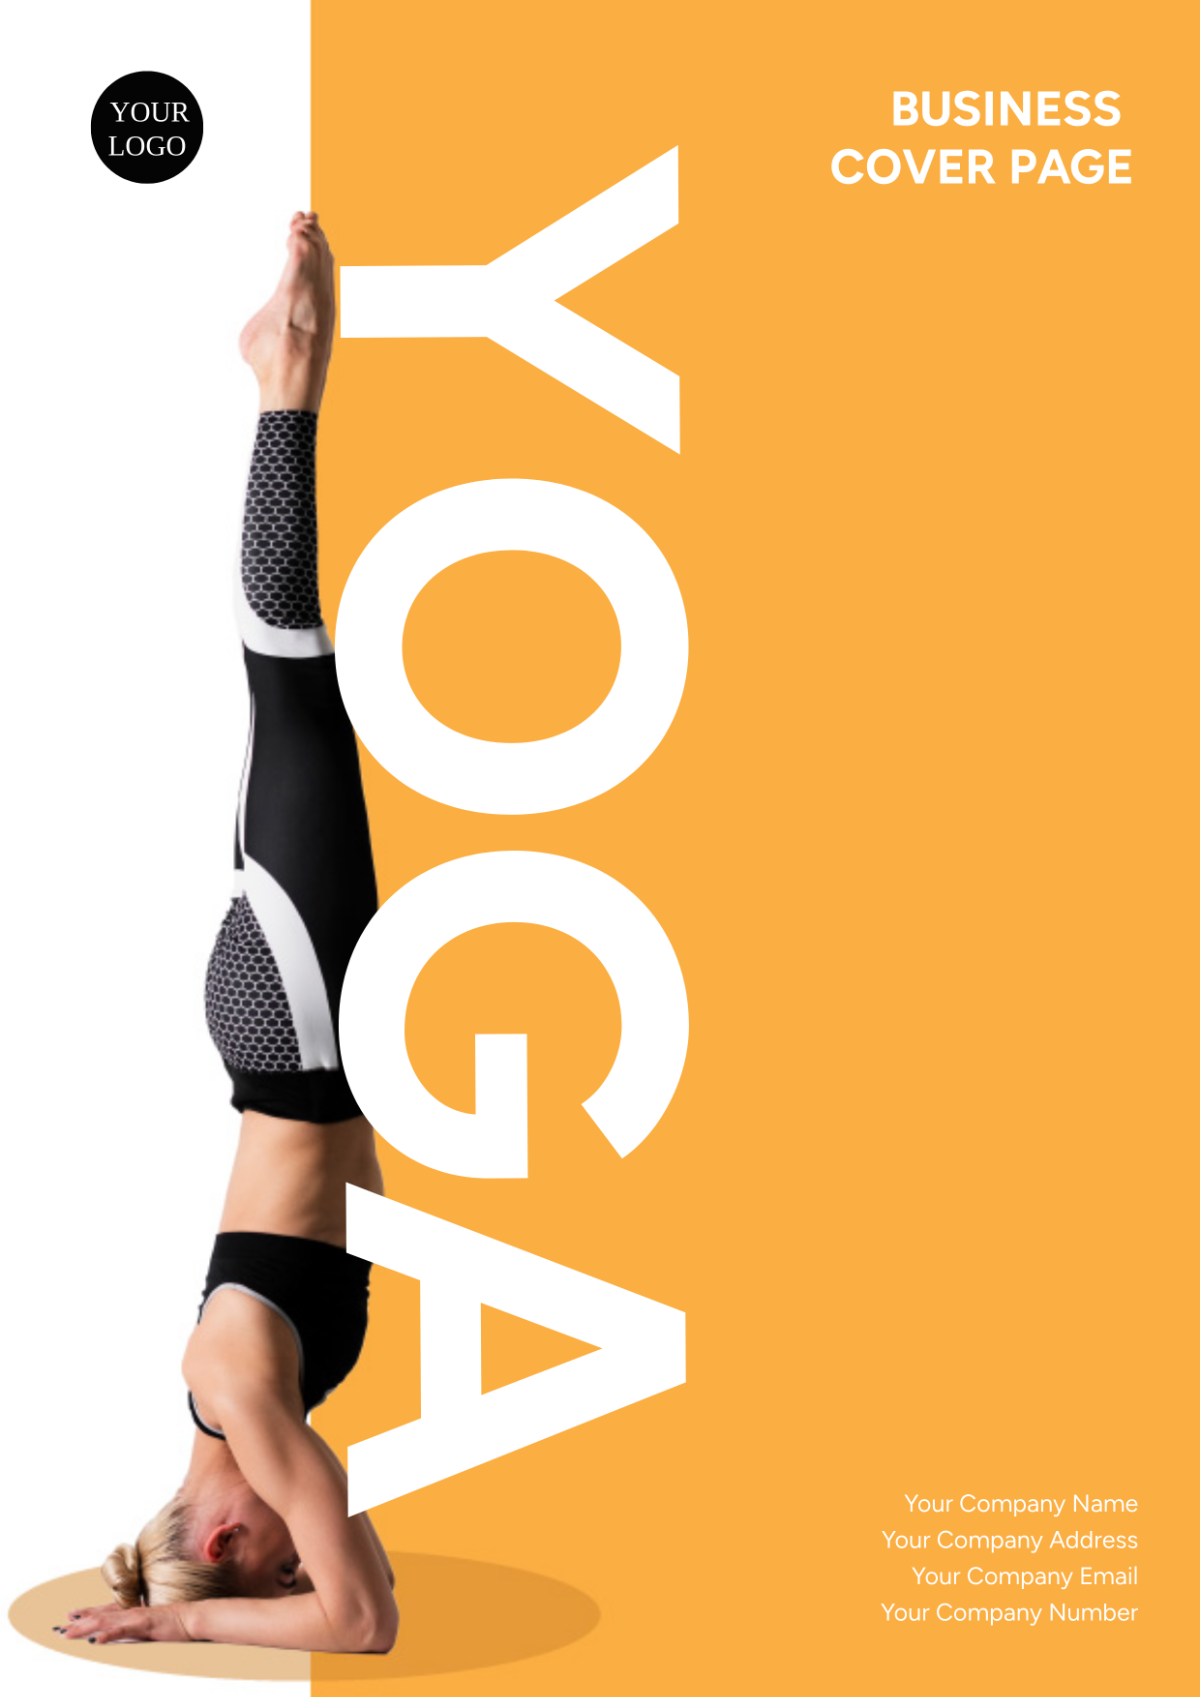 Yoga Studio Business Cover Page